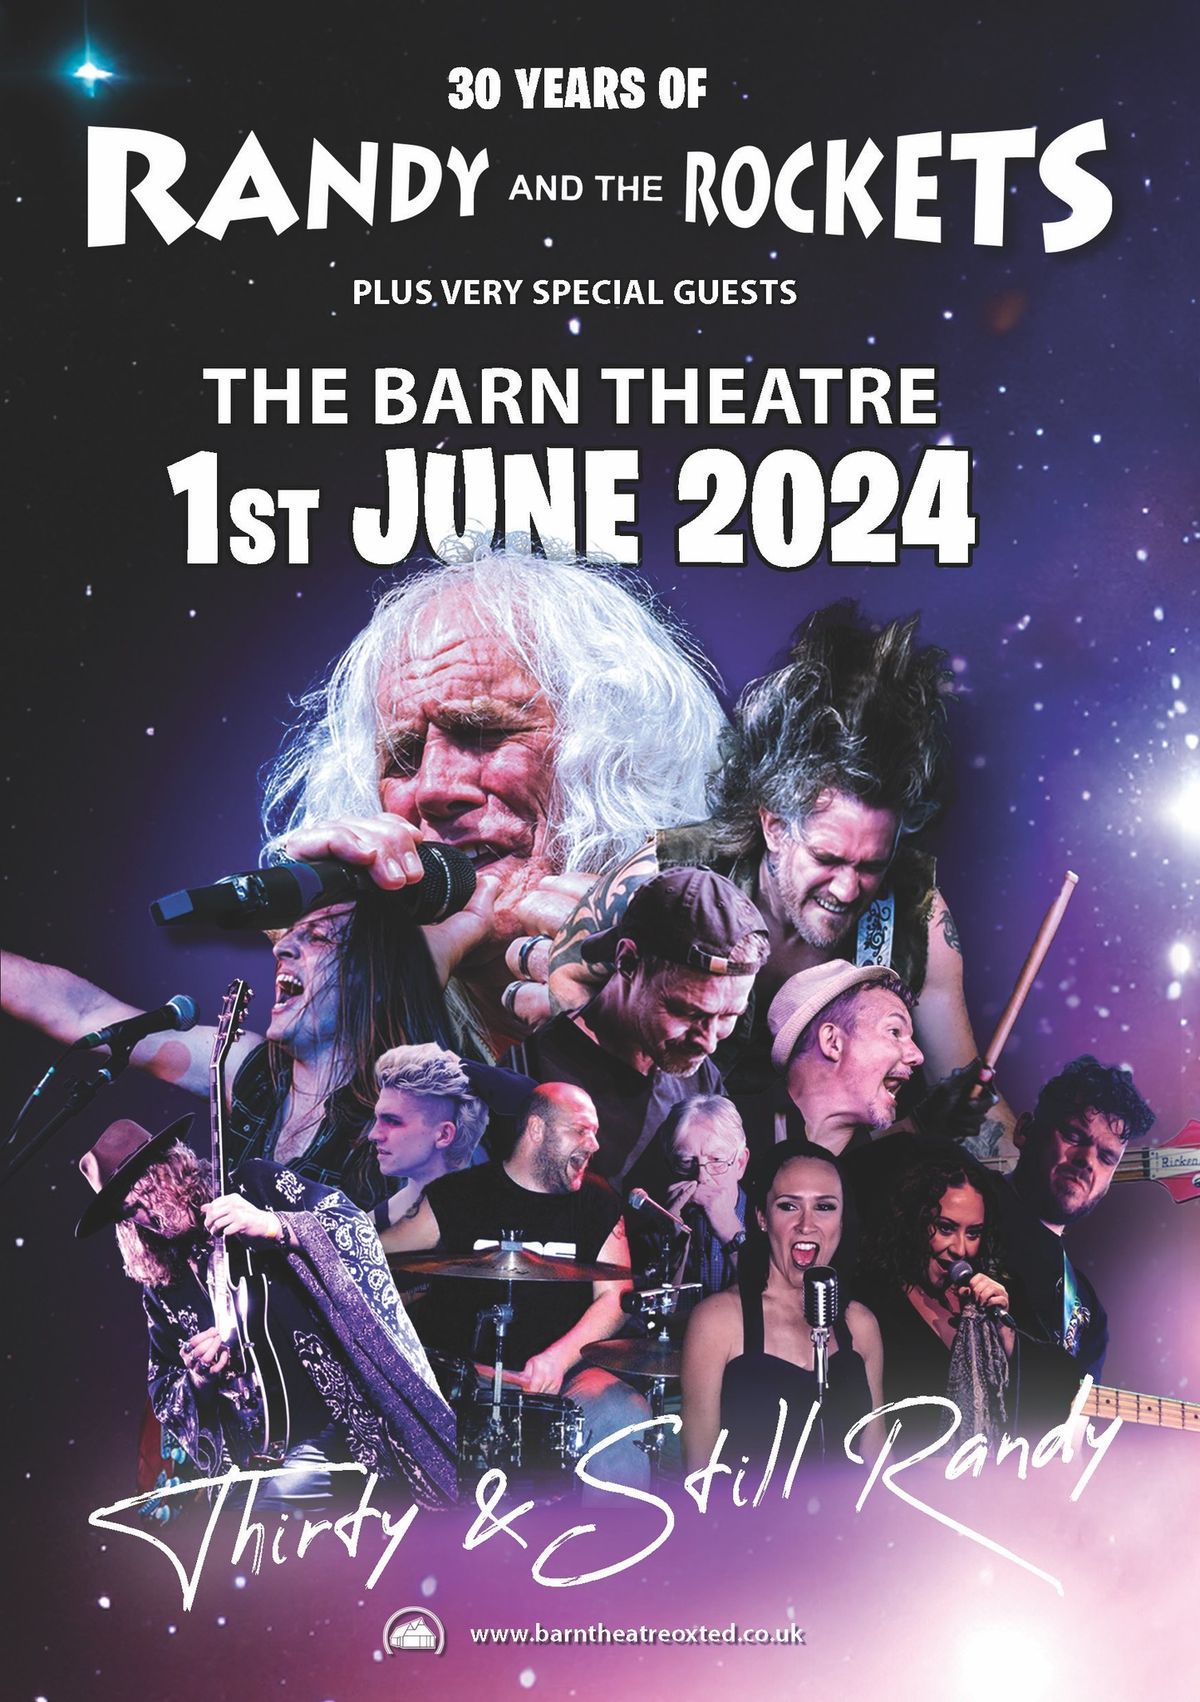 30 Years of Randy and the Rockets at The Barn Theatre